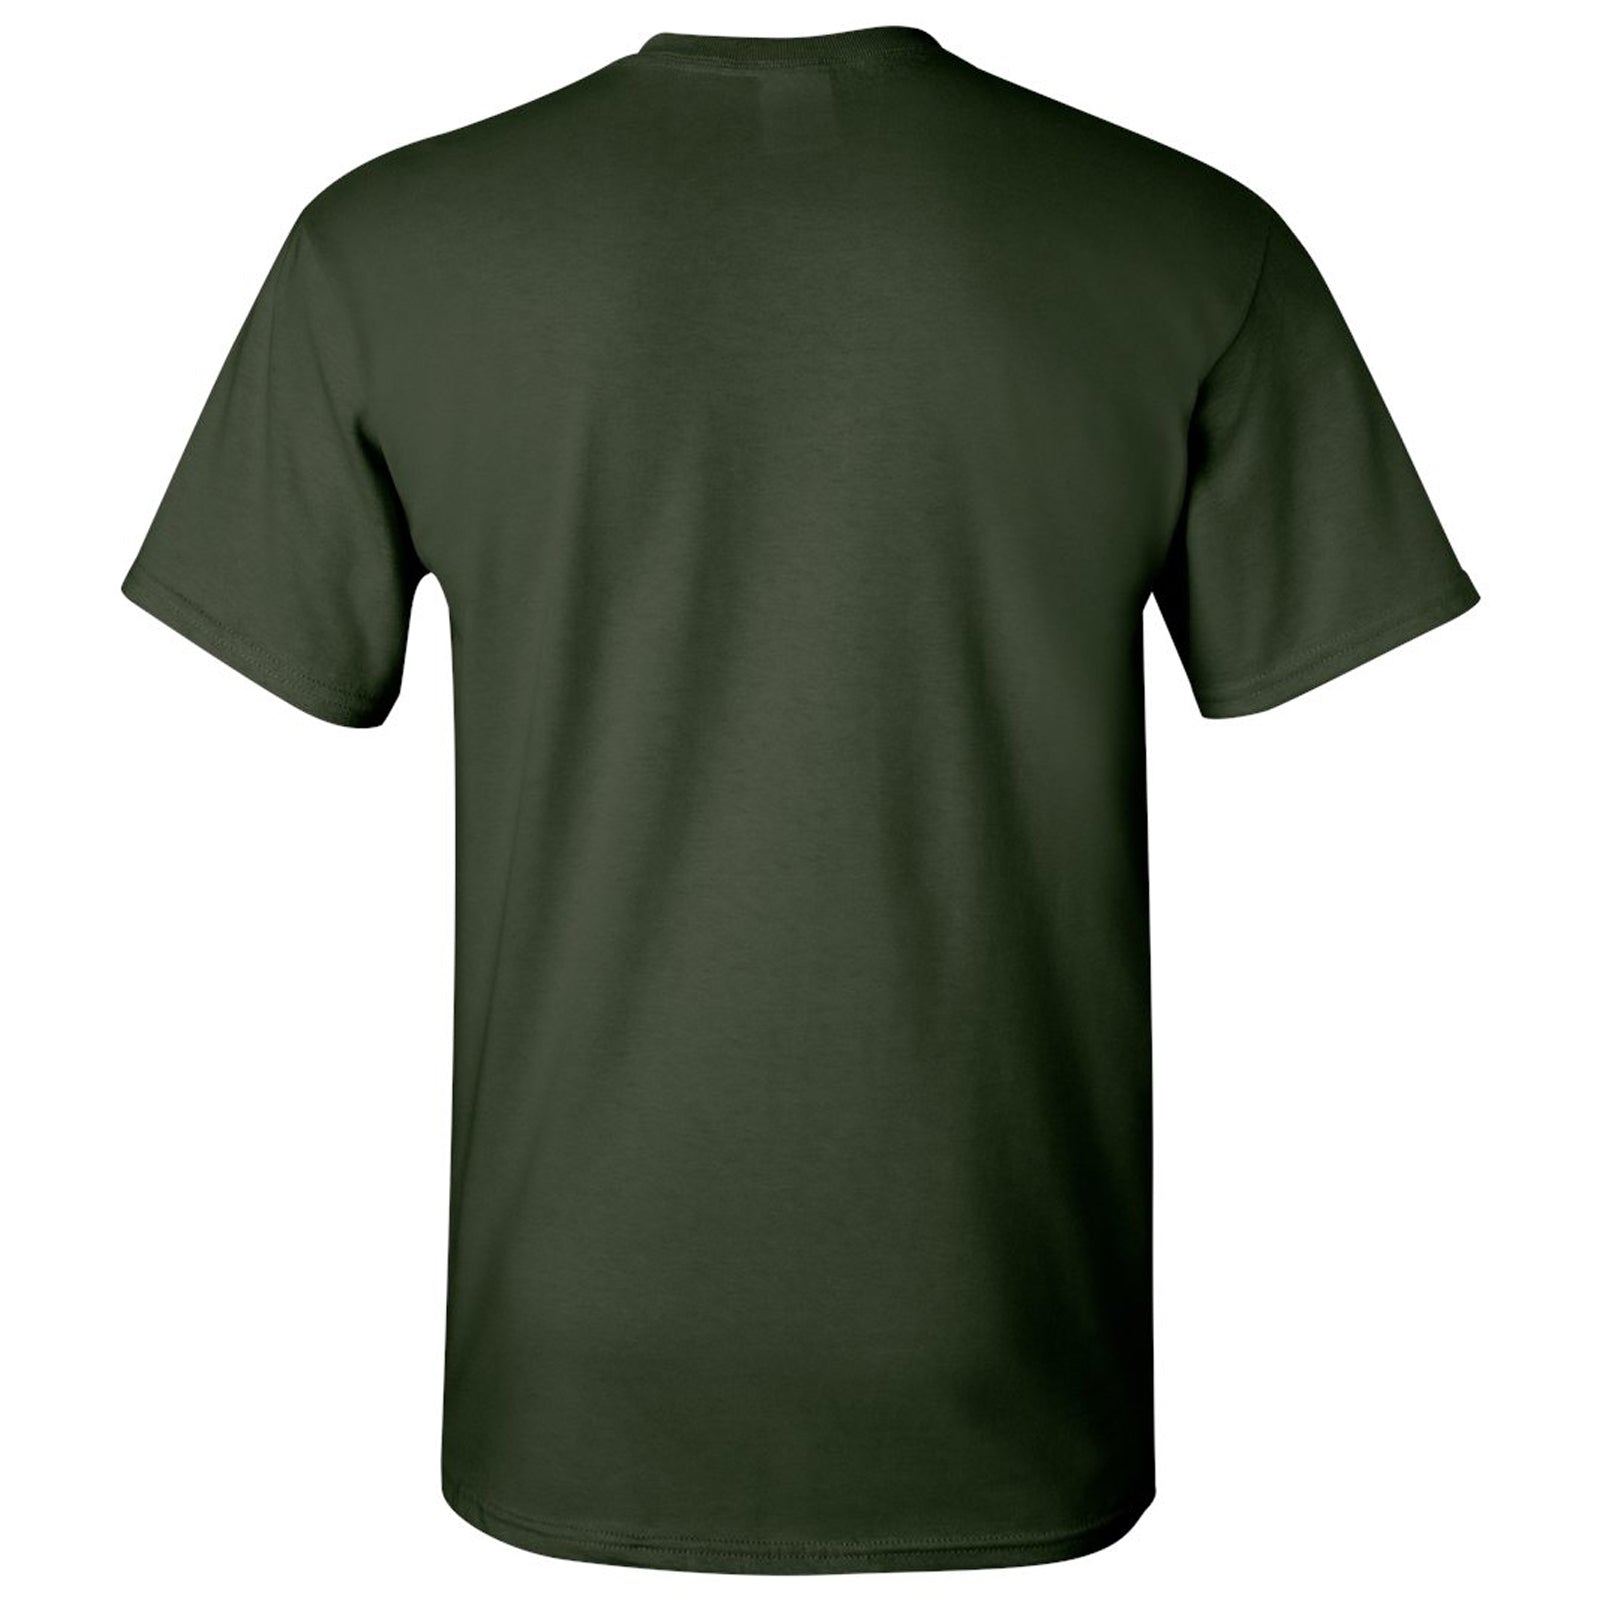 Nation Forest Repeat Retro Bay Sconnie – Green T-Shirt -